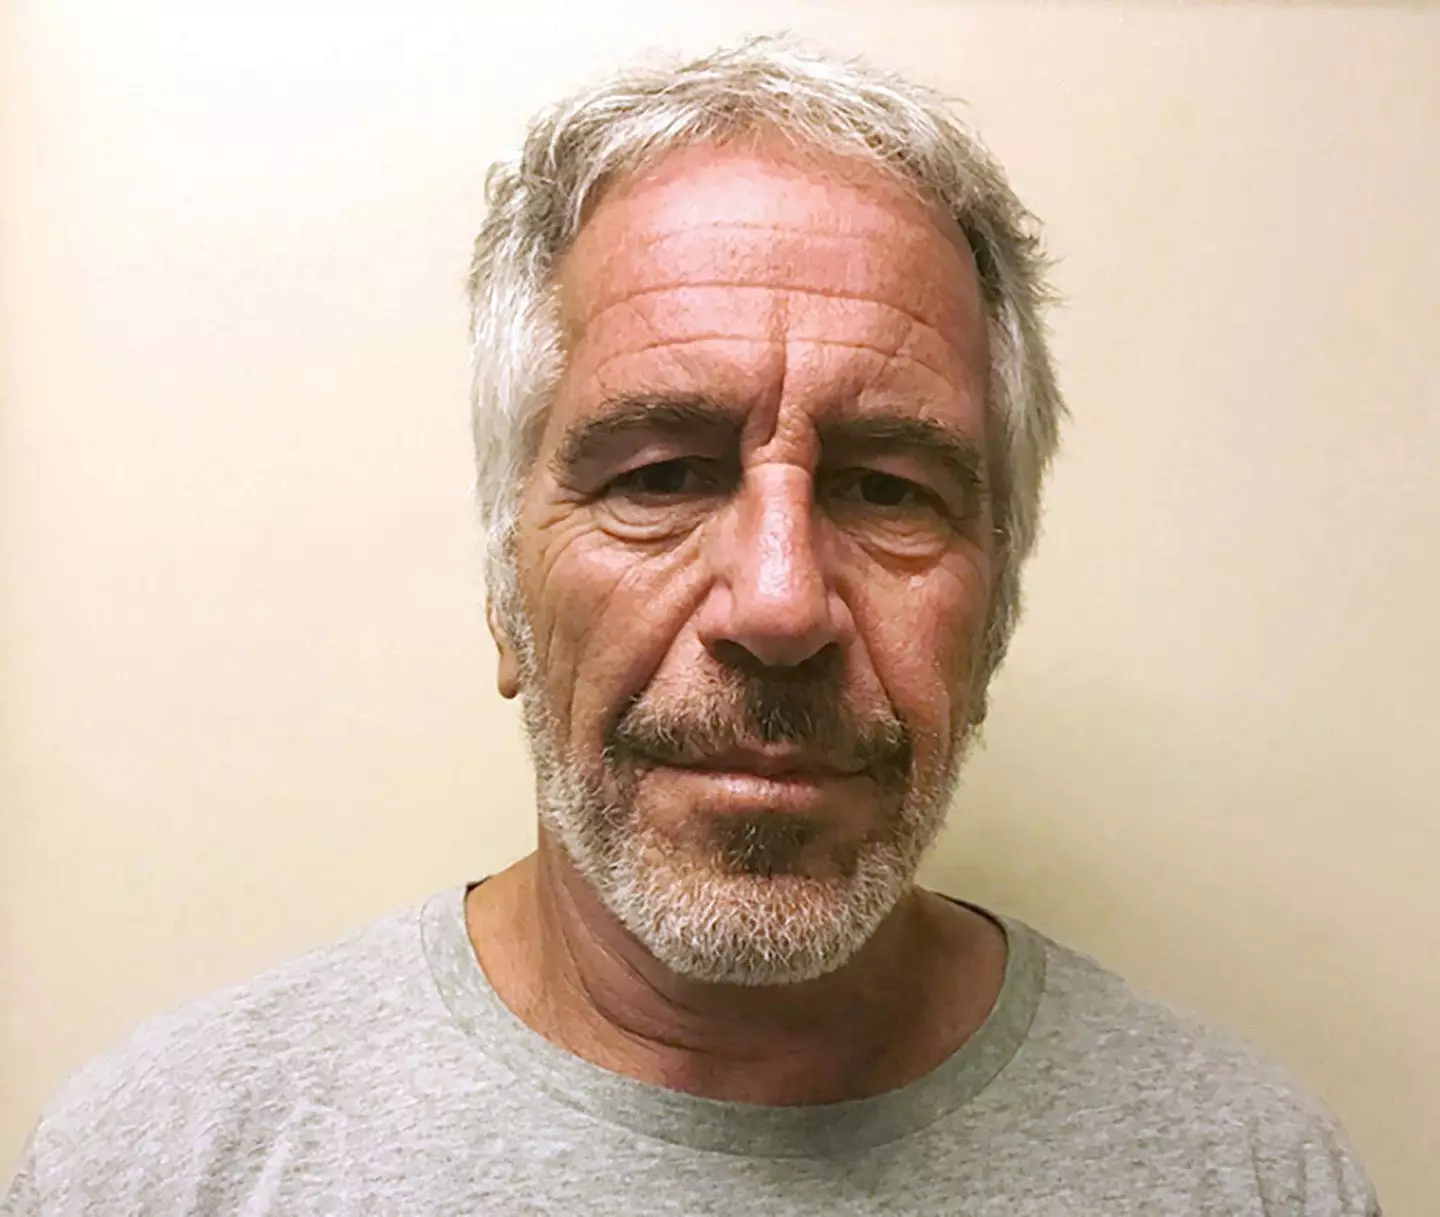 Epstein was found dead in his cell in 2019.